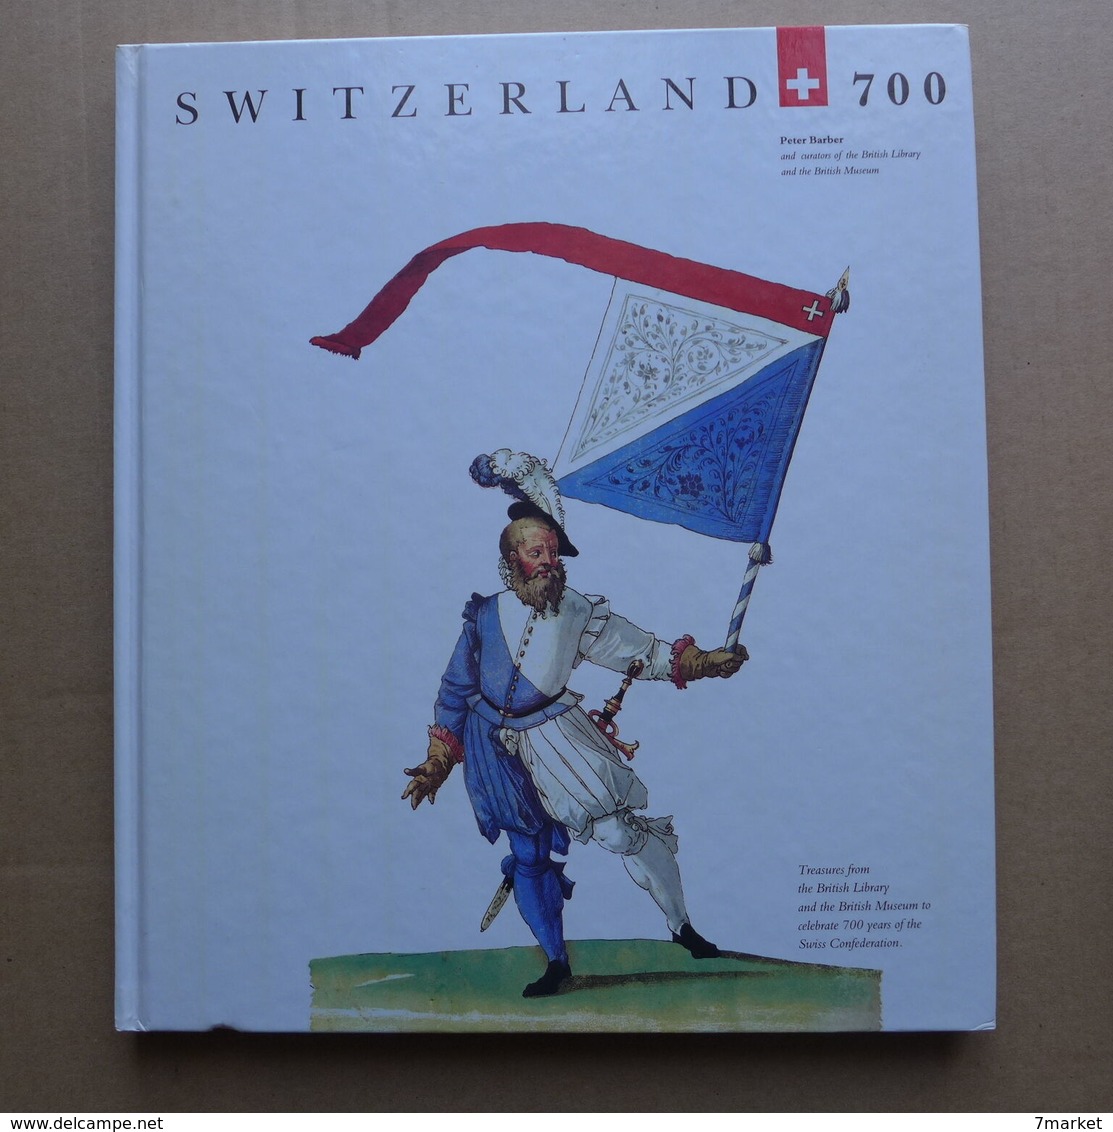 Peter Barber - Switzerland 700 (Suisse) / 1991- éd. The British Library - Europa